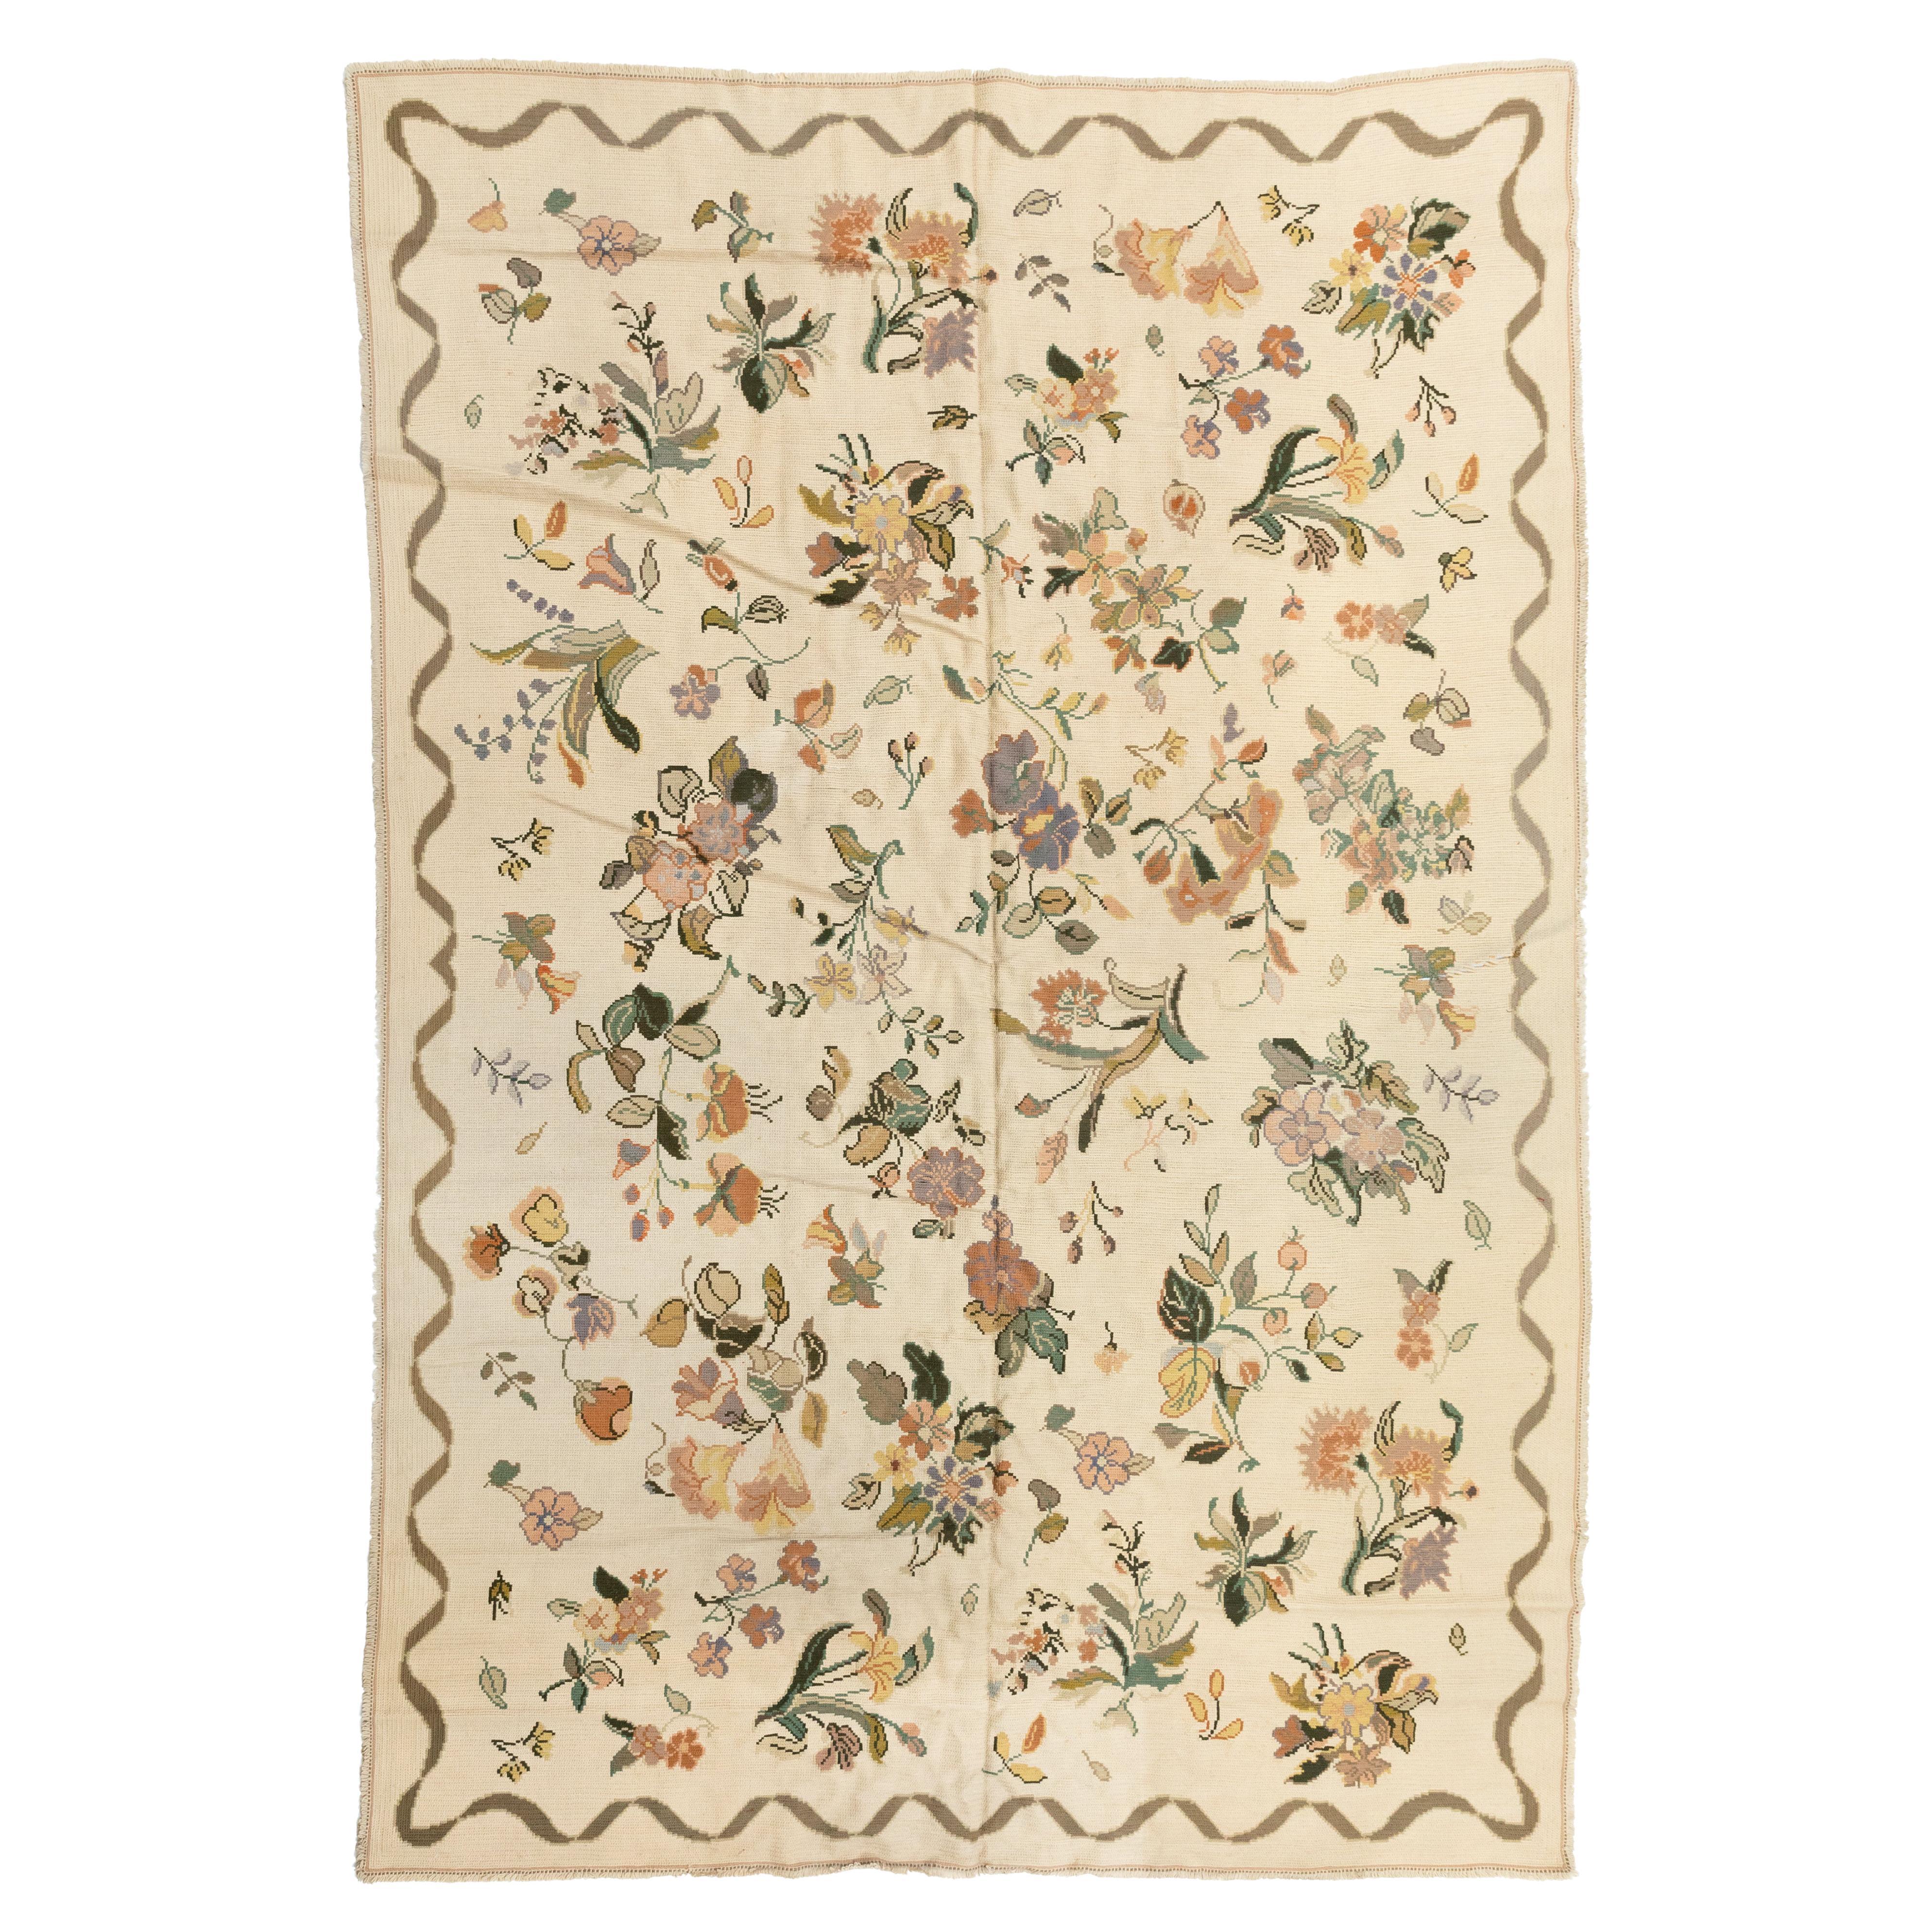 Antique Ivory Portuguese Needlepoint Rug with Flowers, circa 1930-1940s